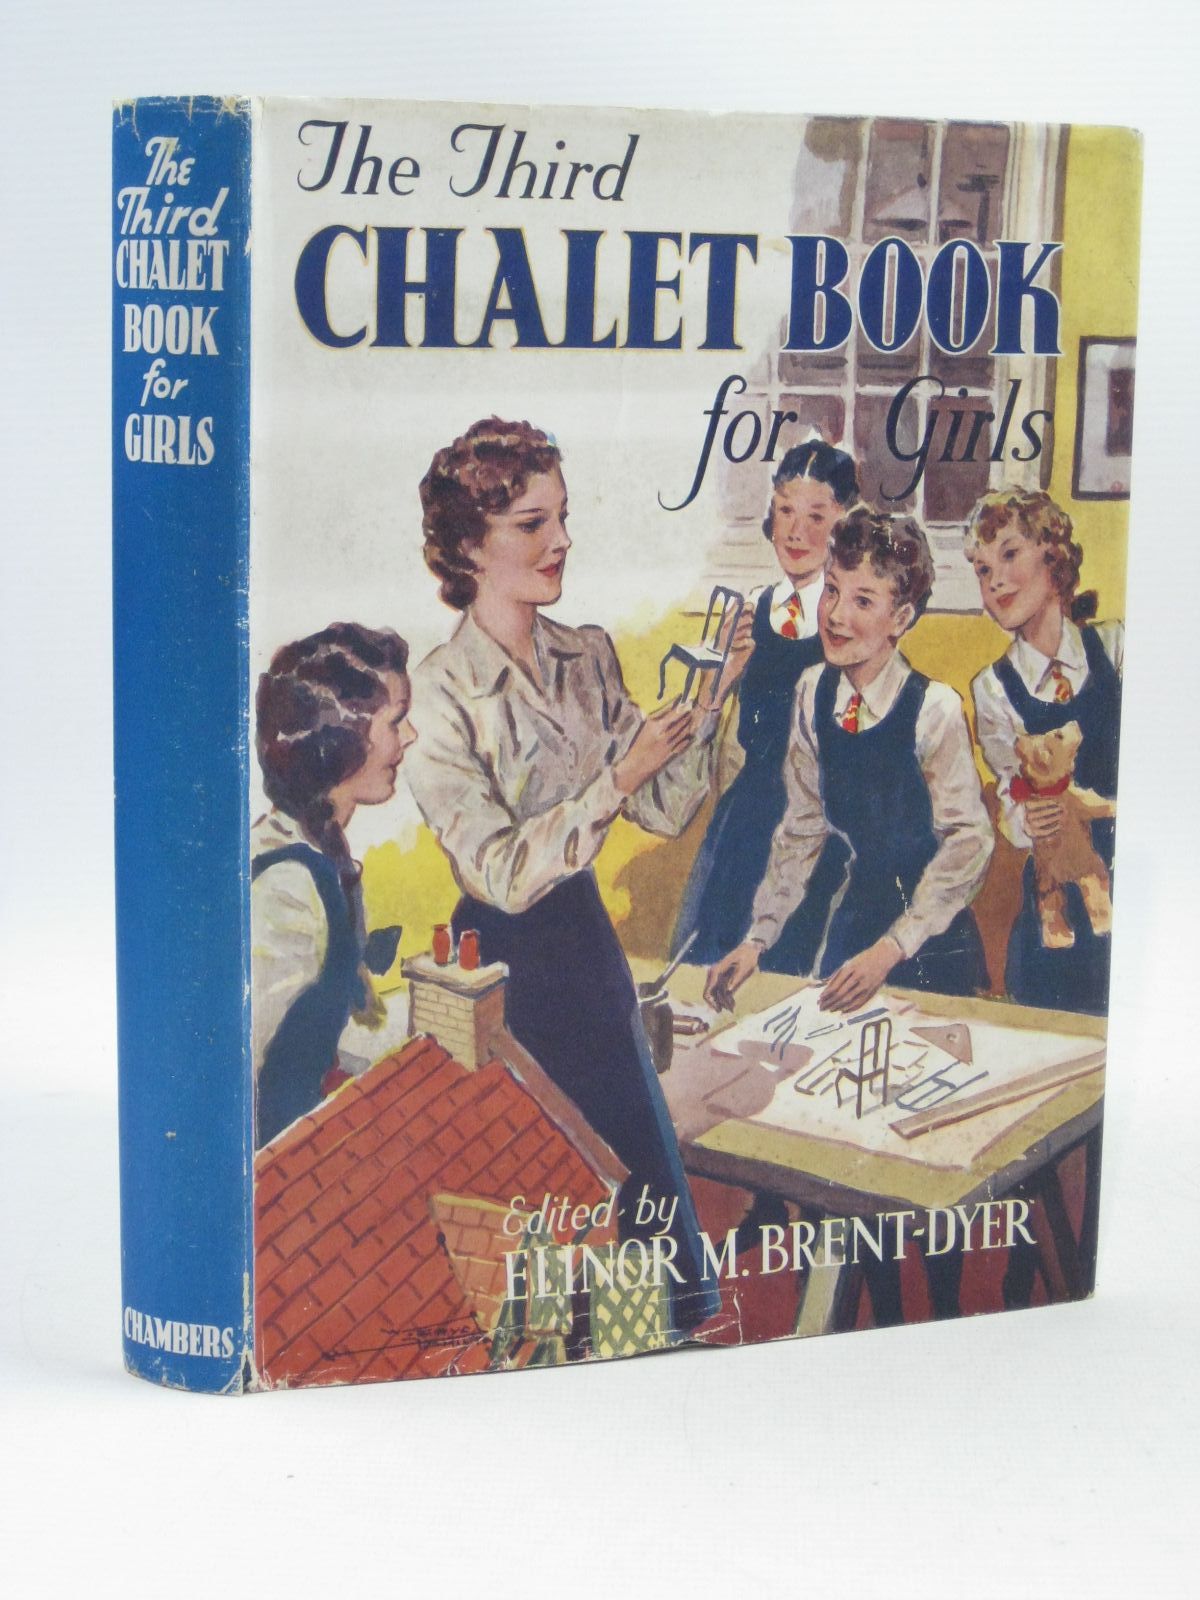 Cover of THE THIRD CHALET BOOK FOR GIRLS by Elinor M. Brent-Dyer